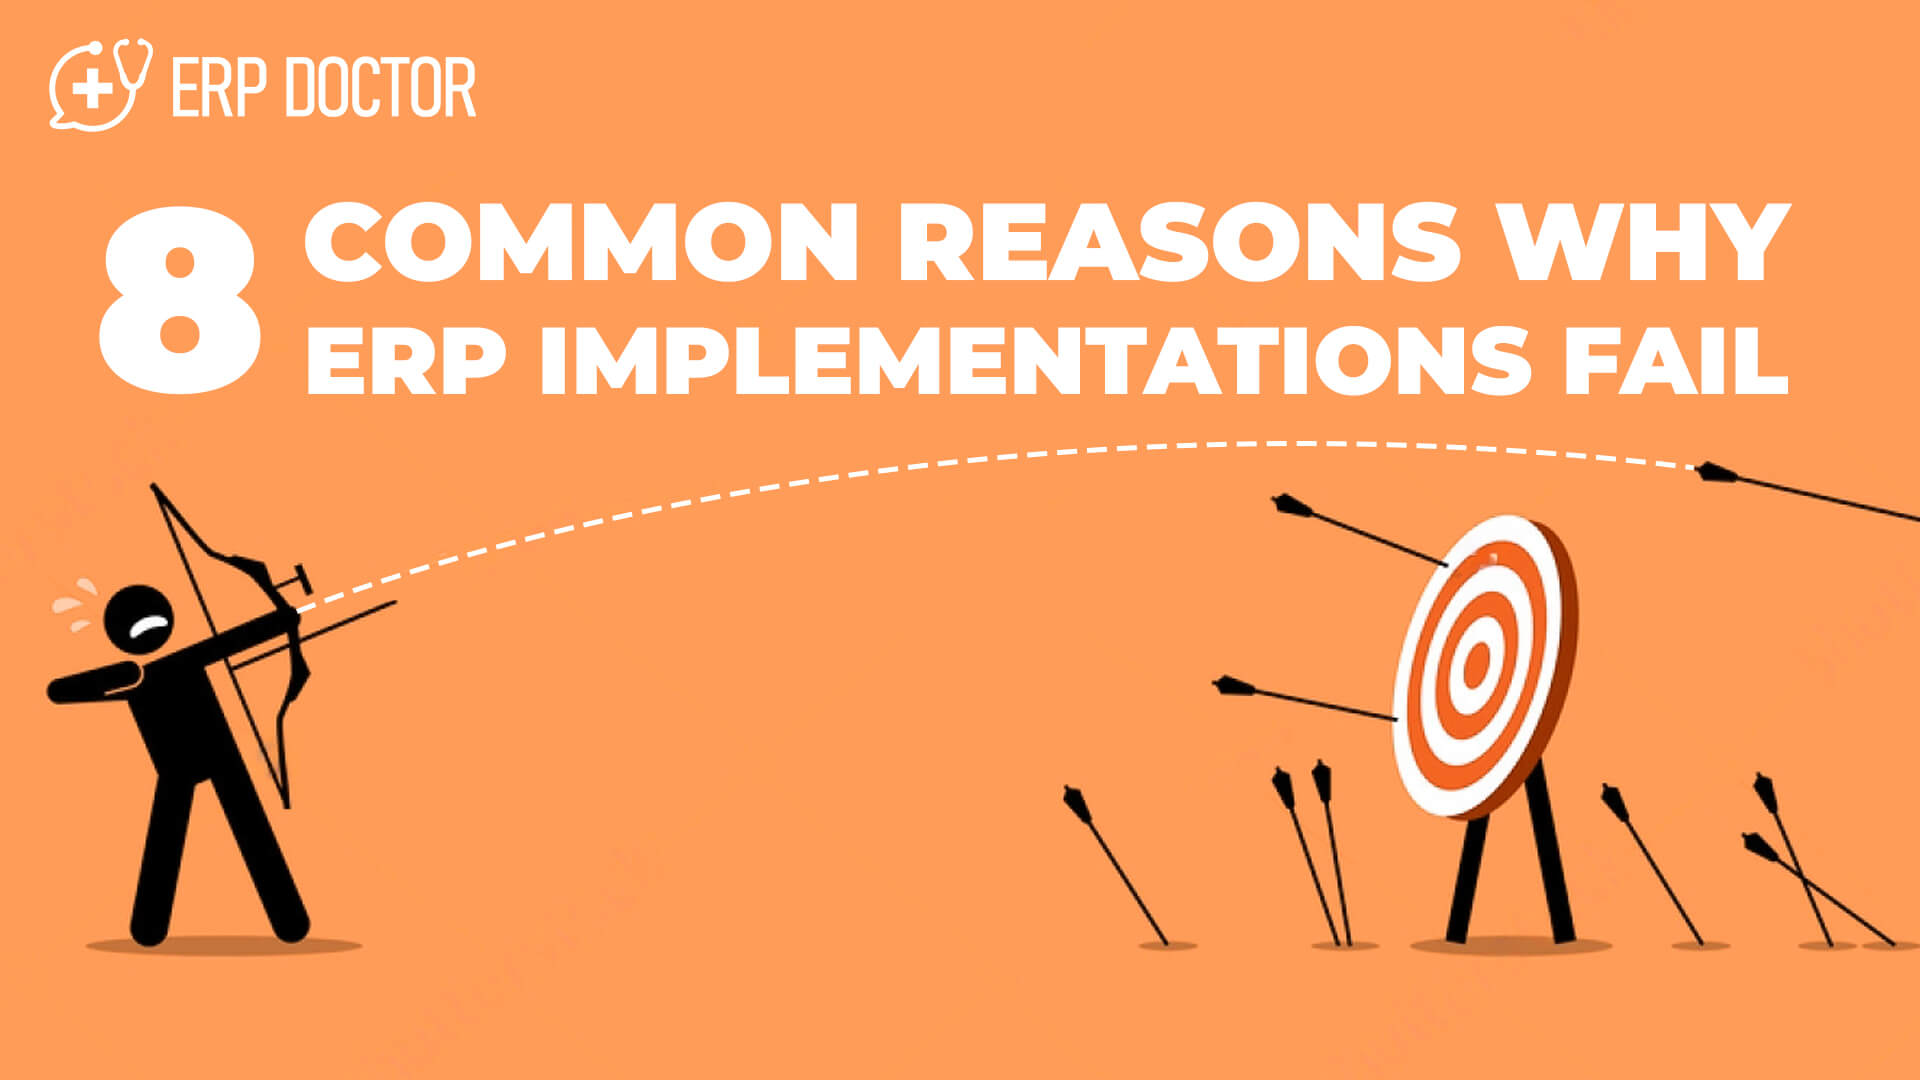 Common Reasons Why Erp Implementations Fail